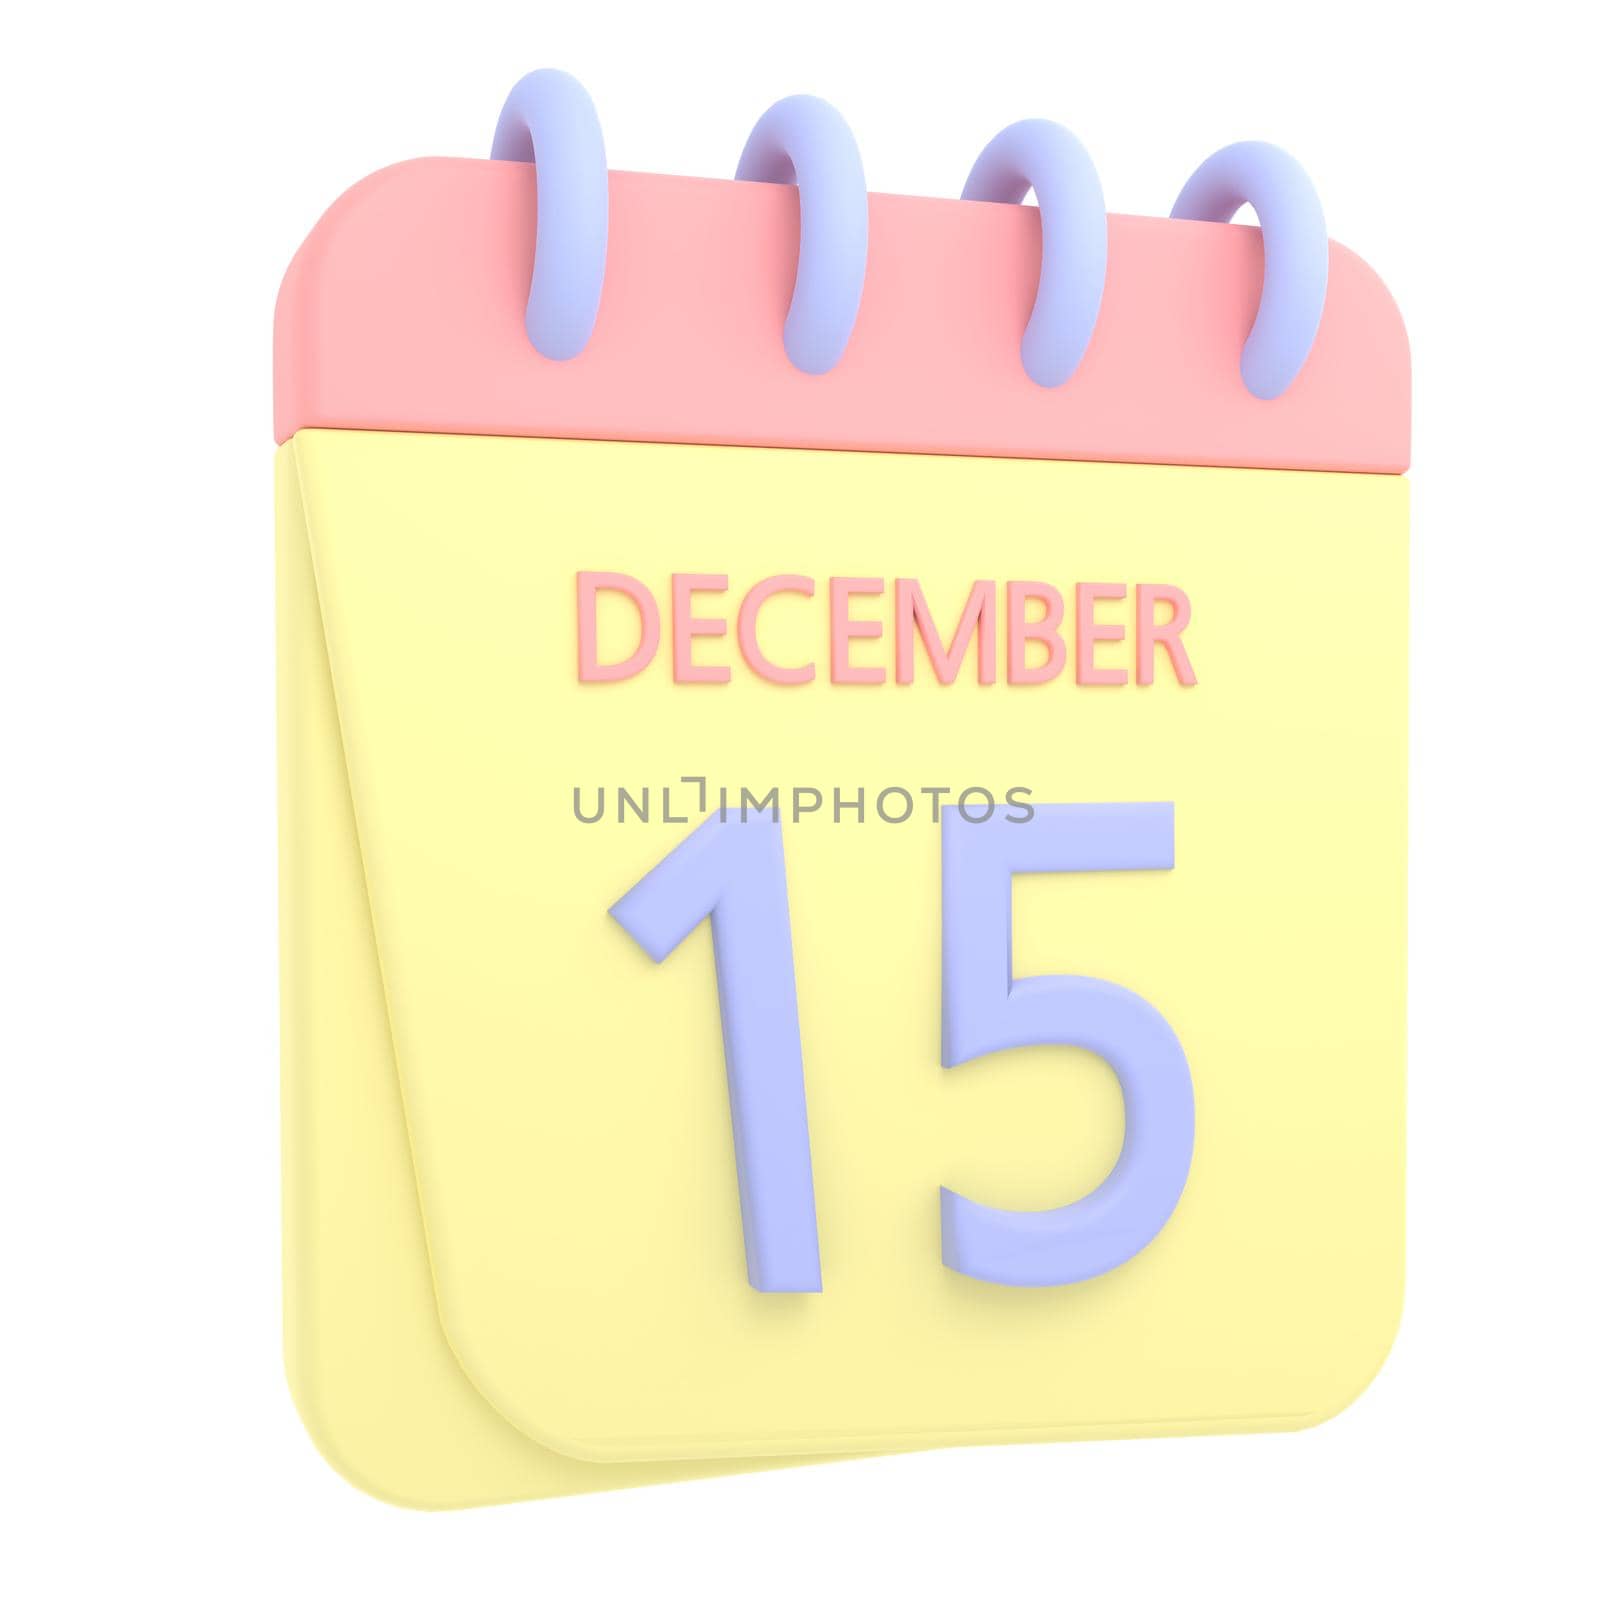 15th December 3D calendar icon. Web style. High resolution image. White background